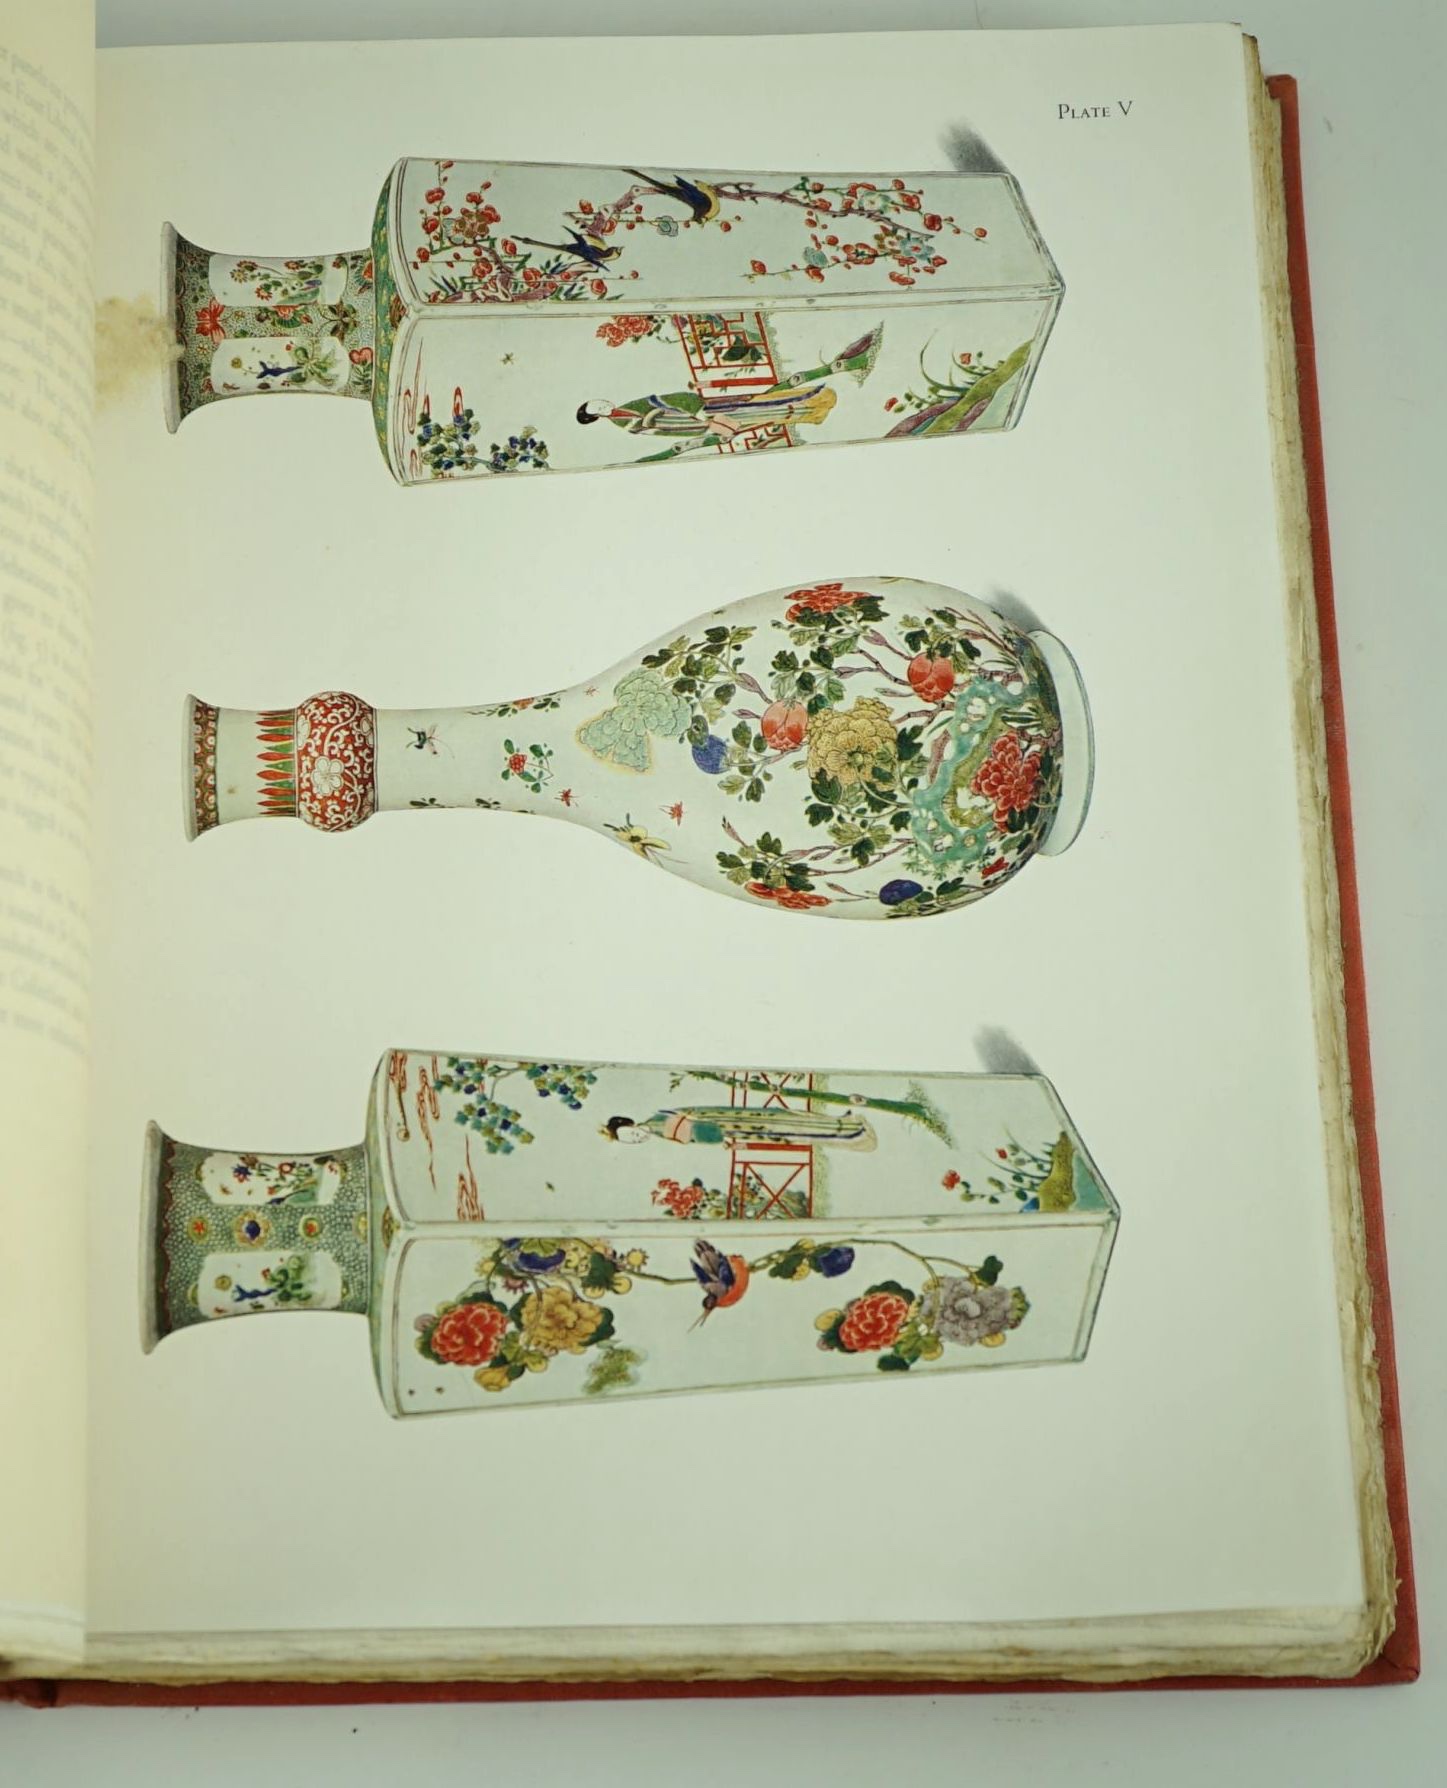 Hobson, Robert Lockhart - Catalogue of the Leonard Gow Collection of Chinese Porcelain, one of 300 signed by Leonard Gow, 4to, original red cloth, with 85 plates, mostly in colour, George W. Jones, London, 1931